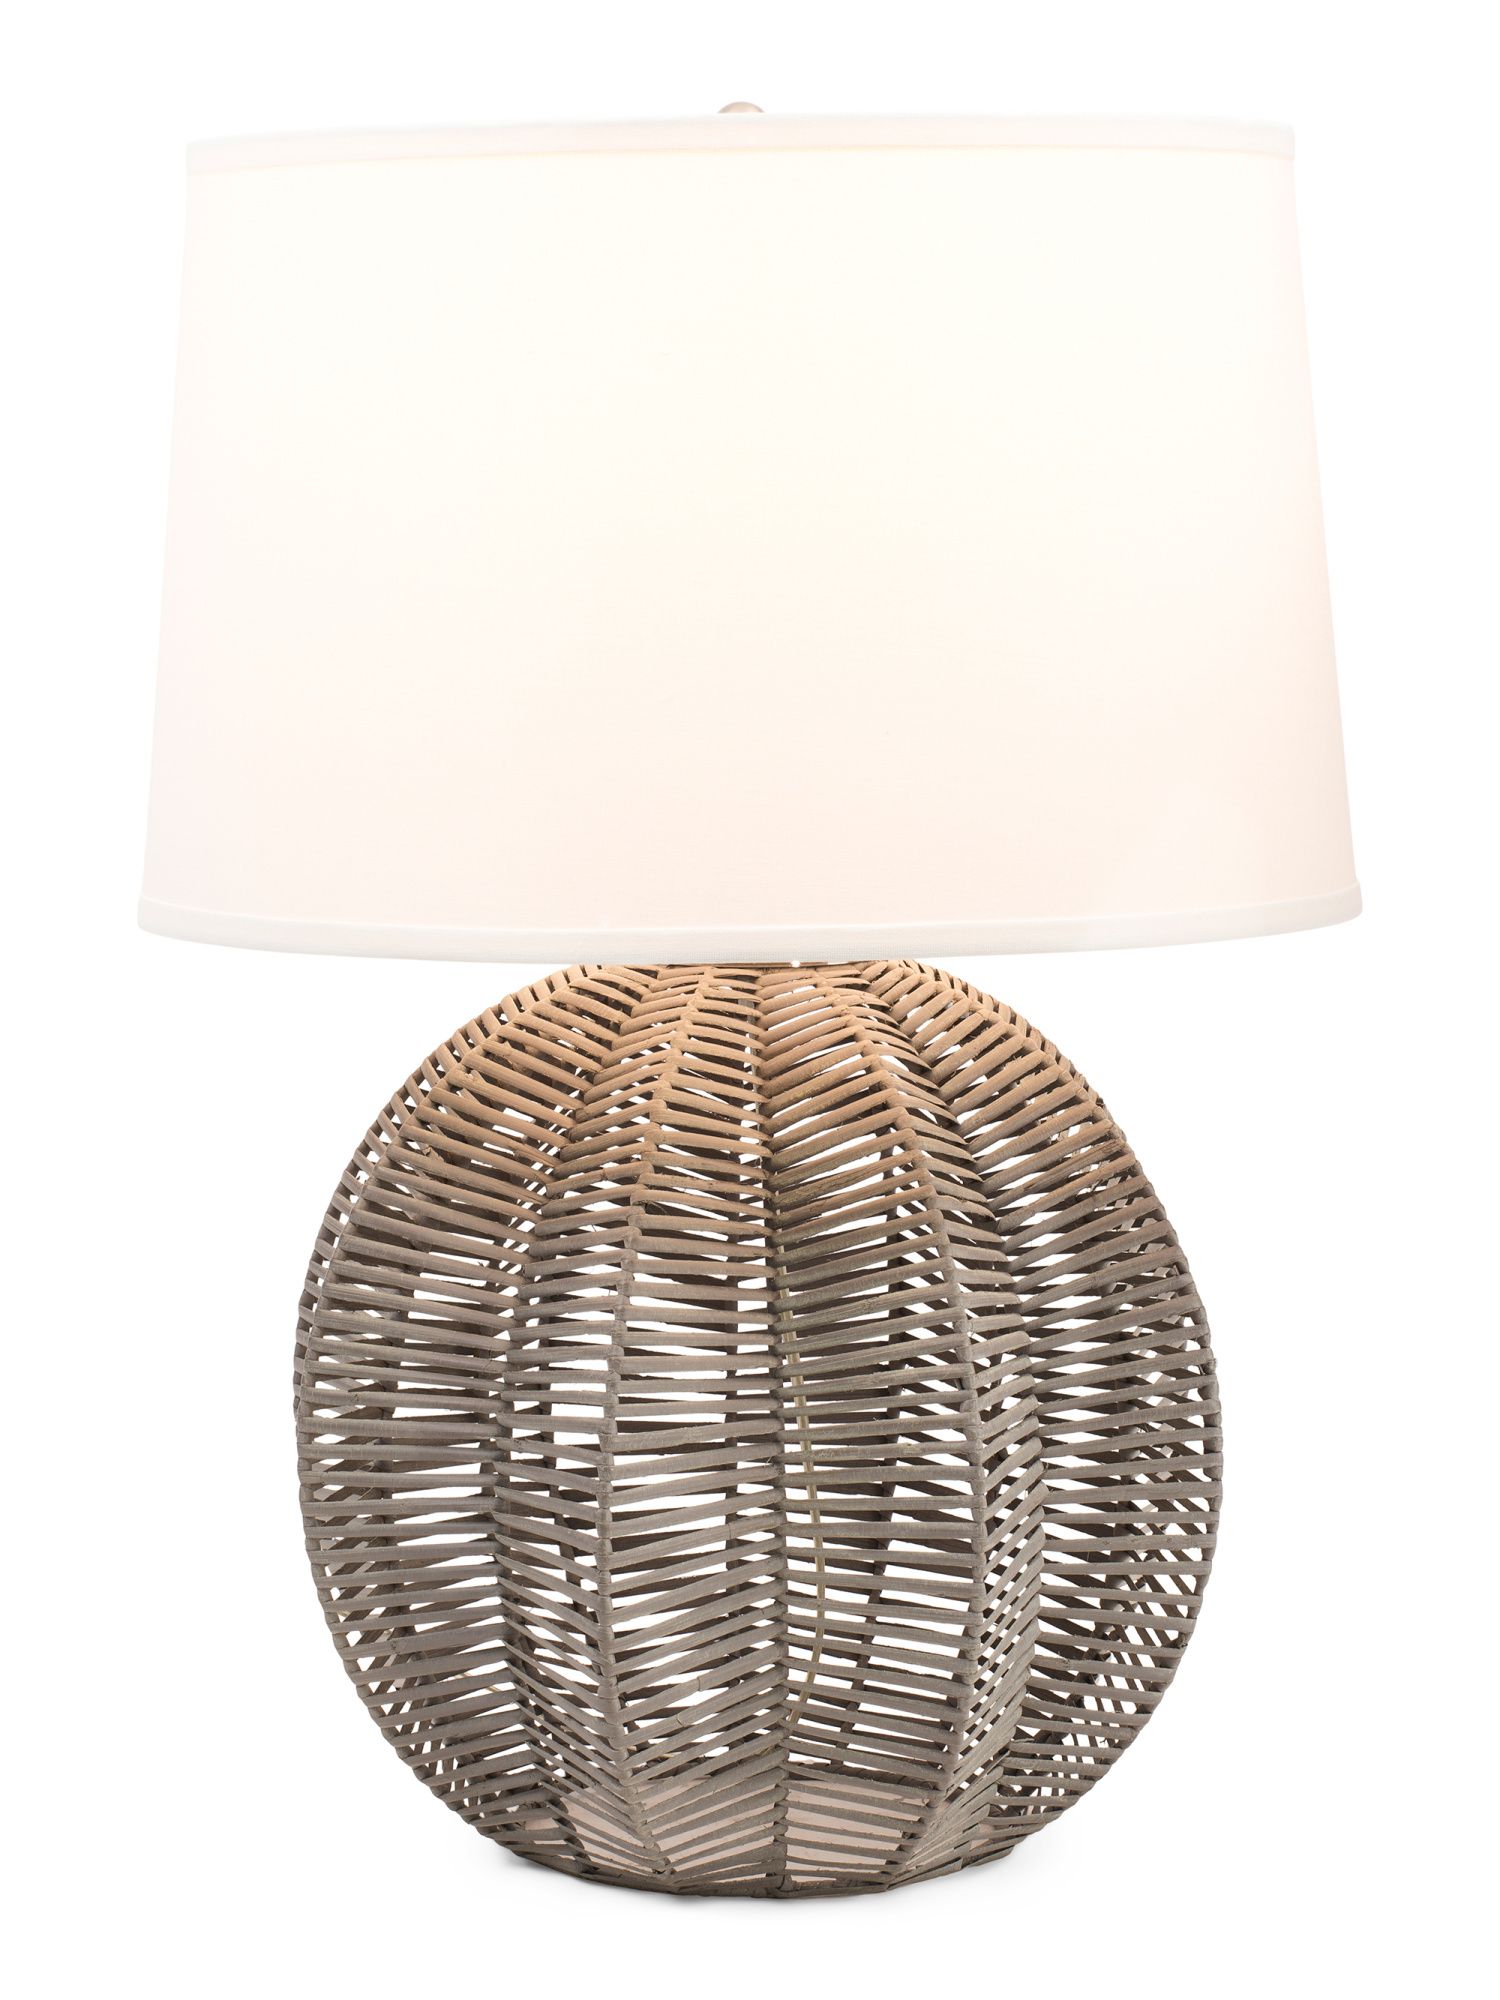 28in Natural Rattan Woven Table Lamp | TJ Maxx